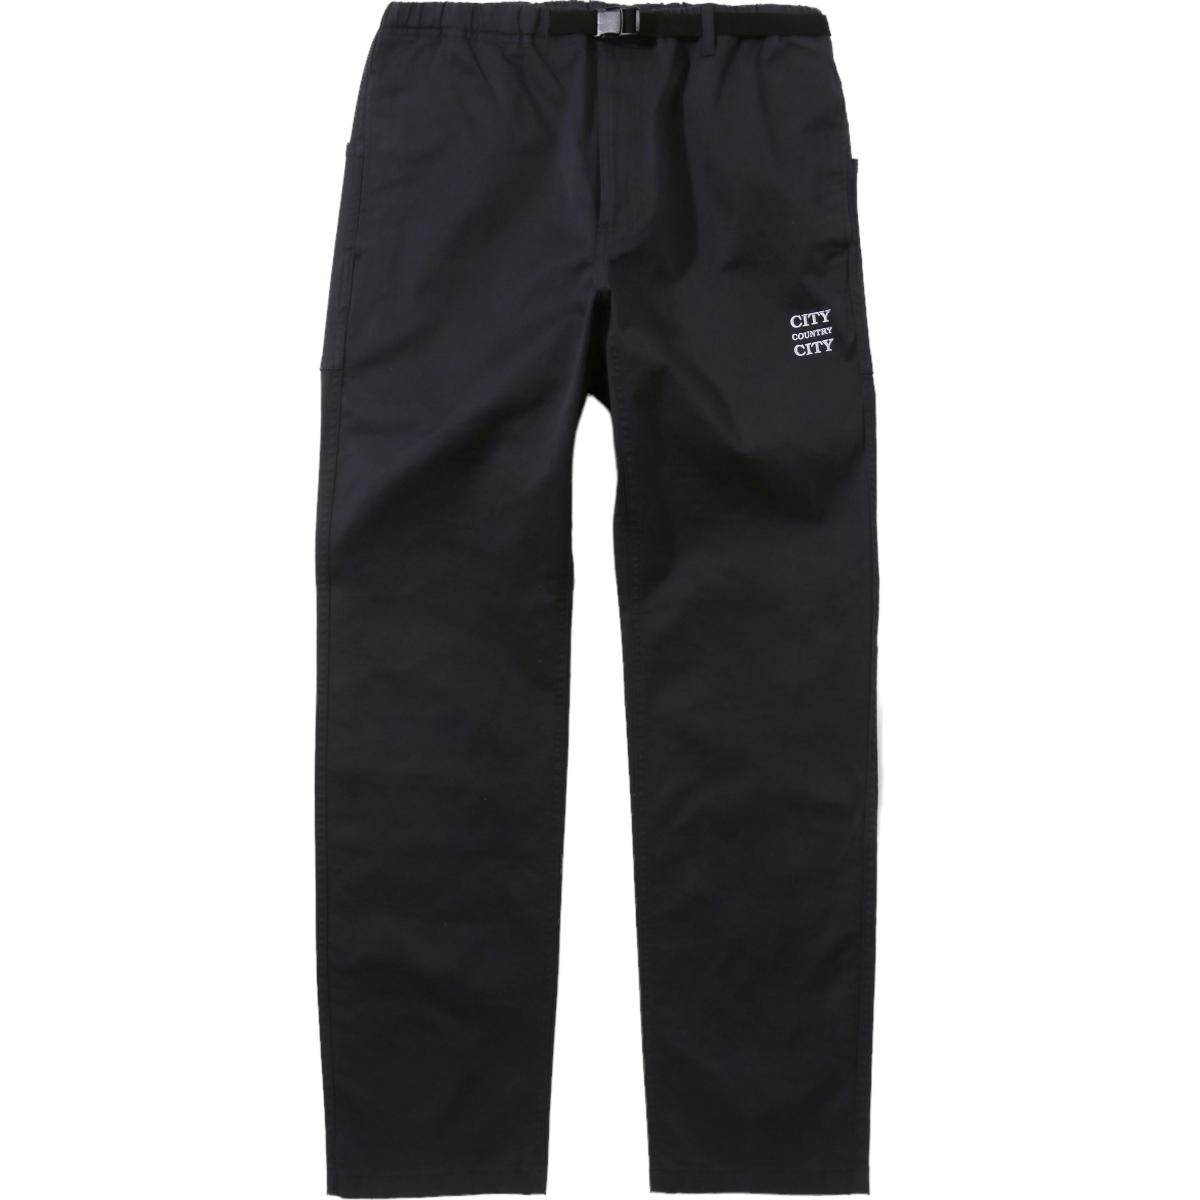 CITY COUNTRY CITY<BR>STRETCH EASY CLIMBING PANTS